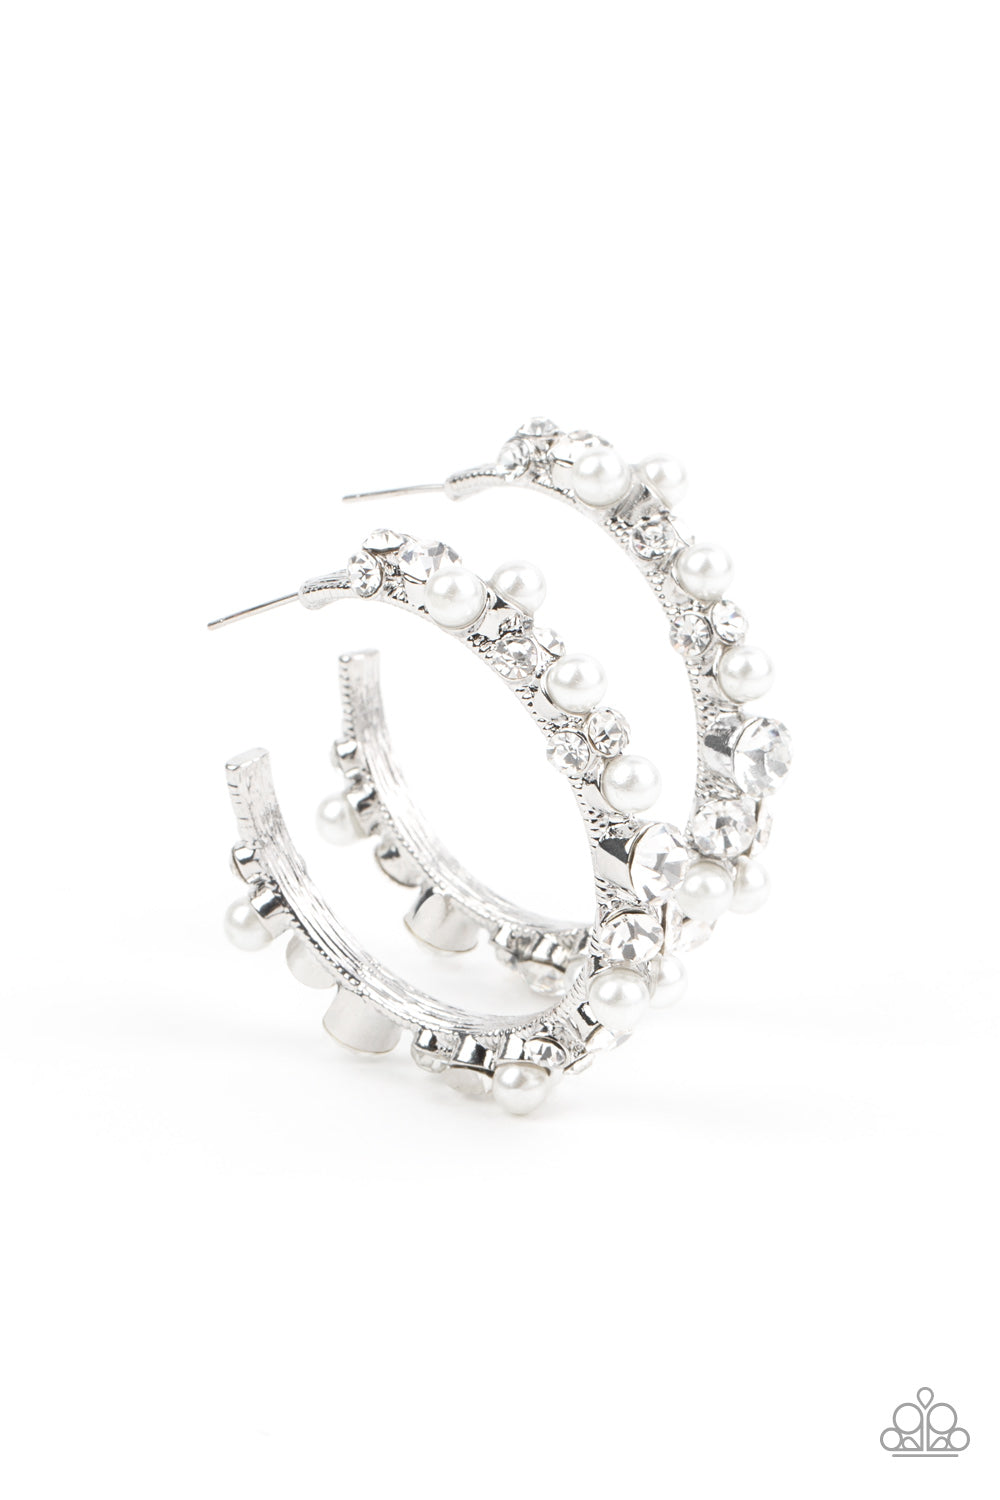 Paparazzi Let There Be SOCIALITE White Post Hoop Earrings - Life of the Party Exclusive September 2021